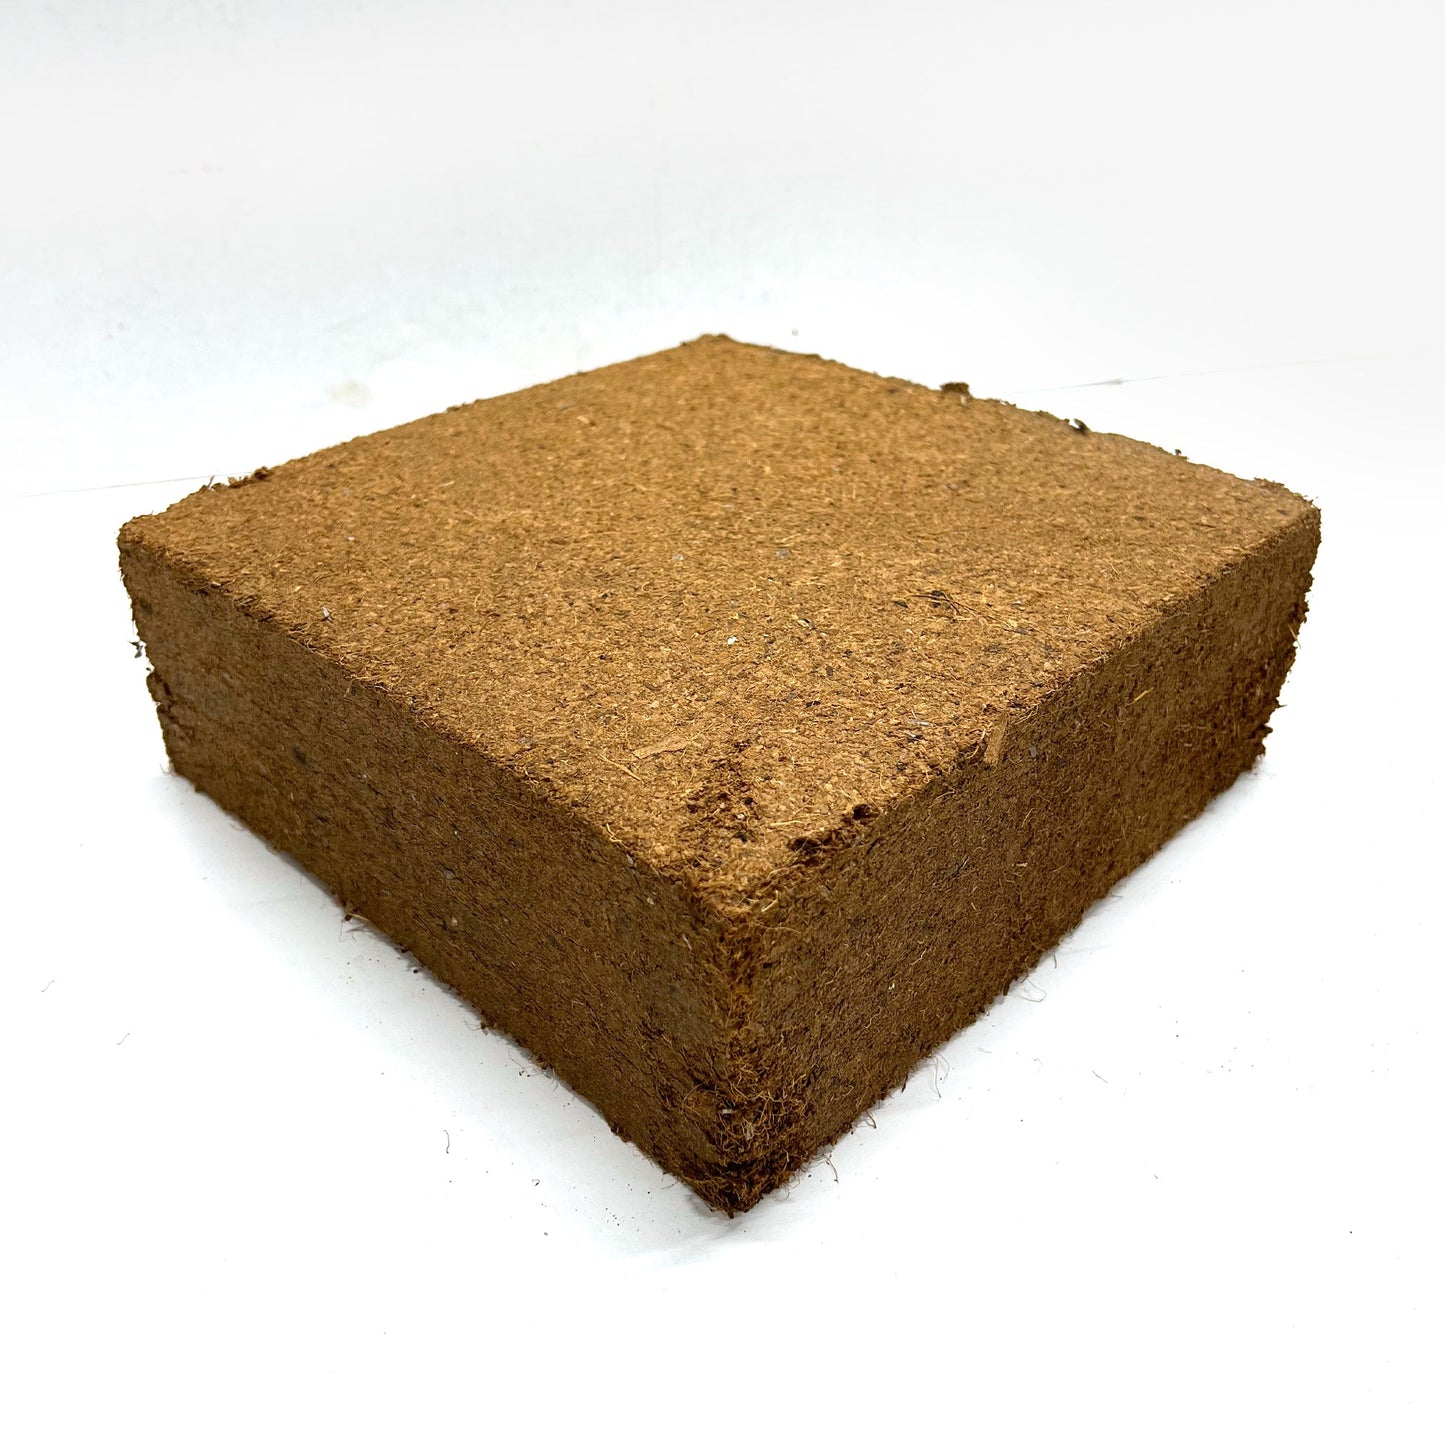 Pack of 200, Best Coco Peat - Premium Coir Pith 5Kg/11 Lbs Block, Expands to 15 Gallon, Low EC